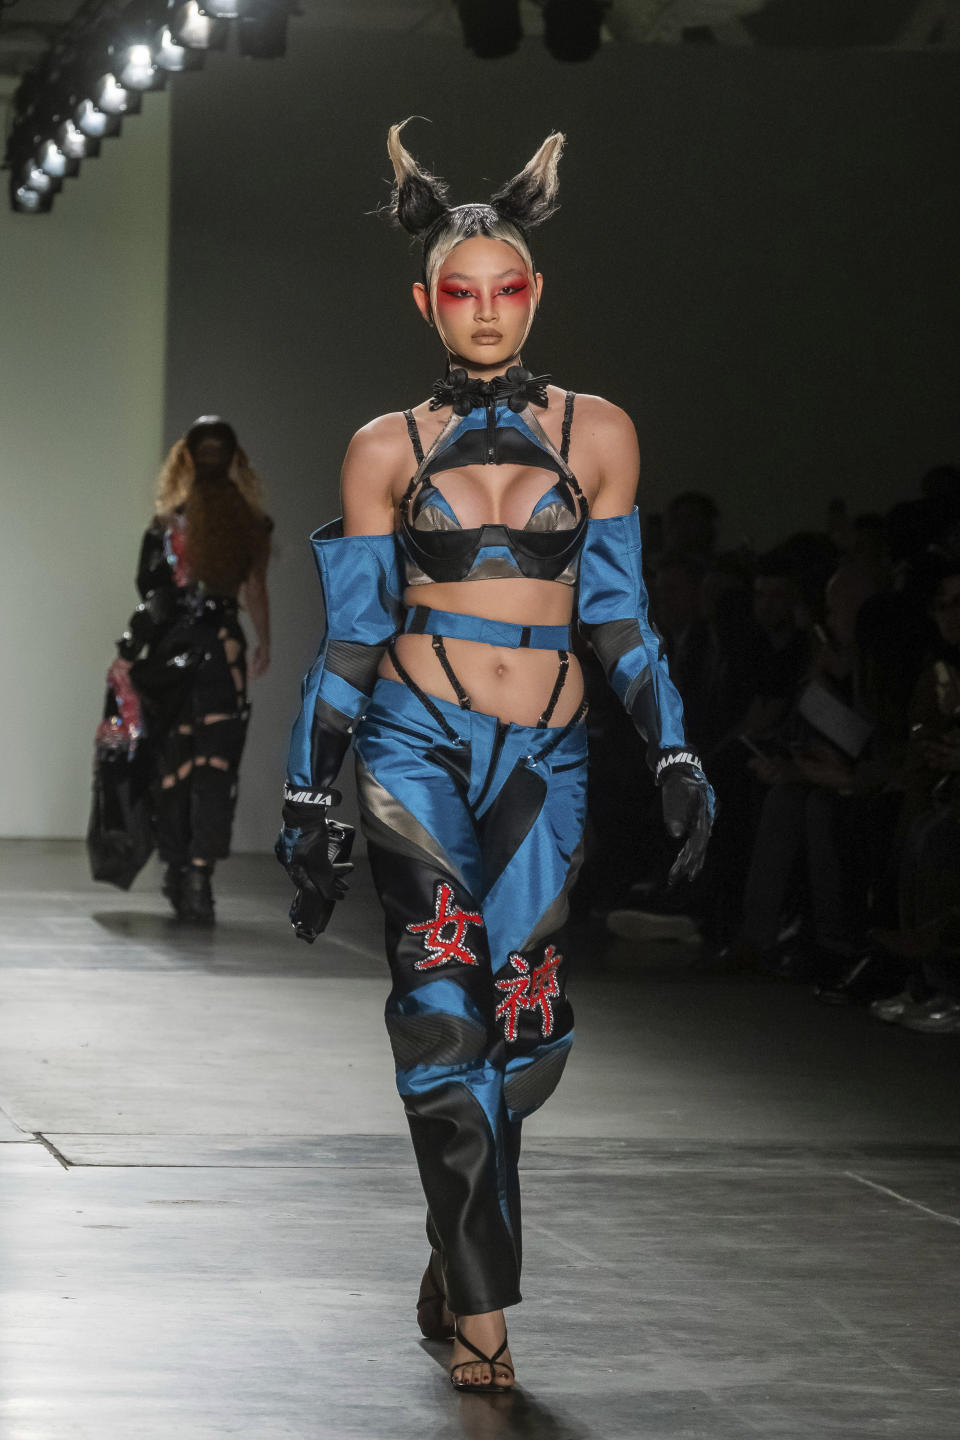 The Namilia collection is modeled at Pier 59 Studios during New York Fashion Week on Sunday, Feb. 9, 2020 in New York. (Photo by Charles Sykes/Invision/AP)